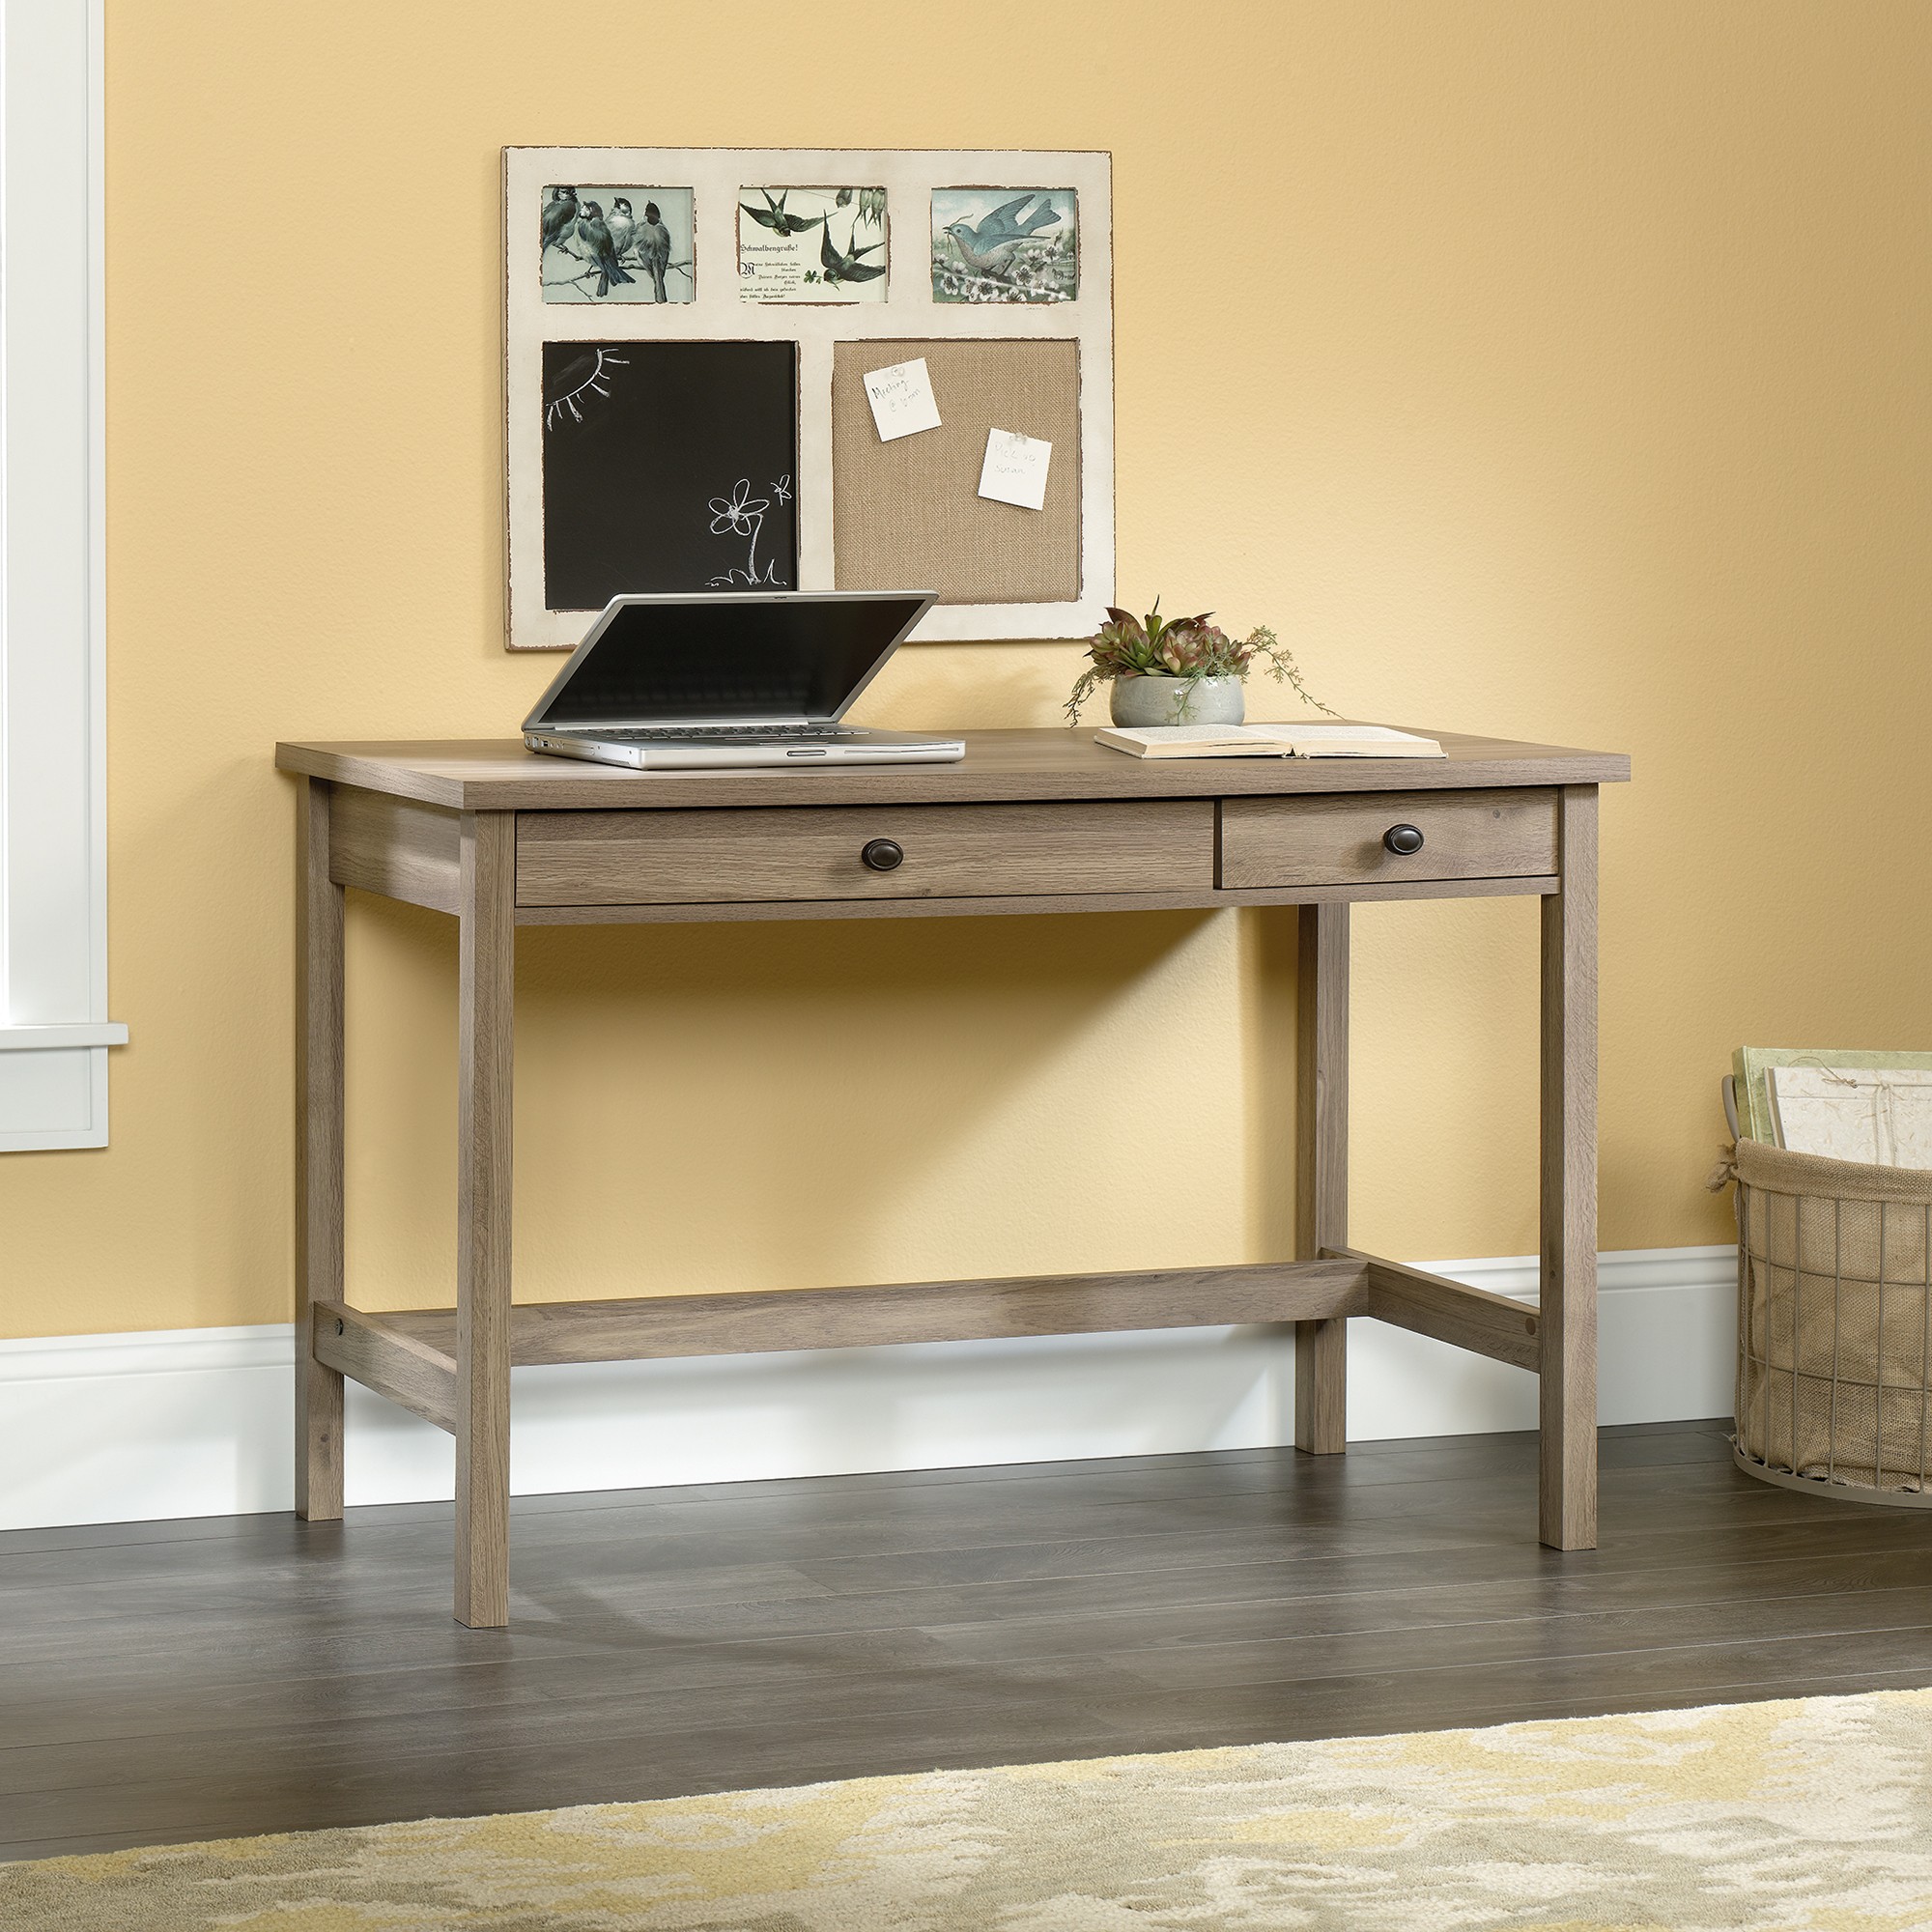 418213 | County Line Collection | Writing Desk 